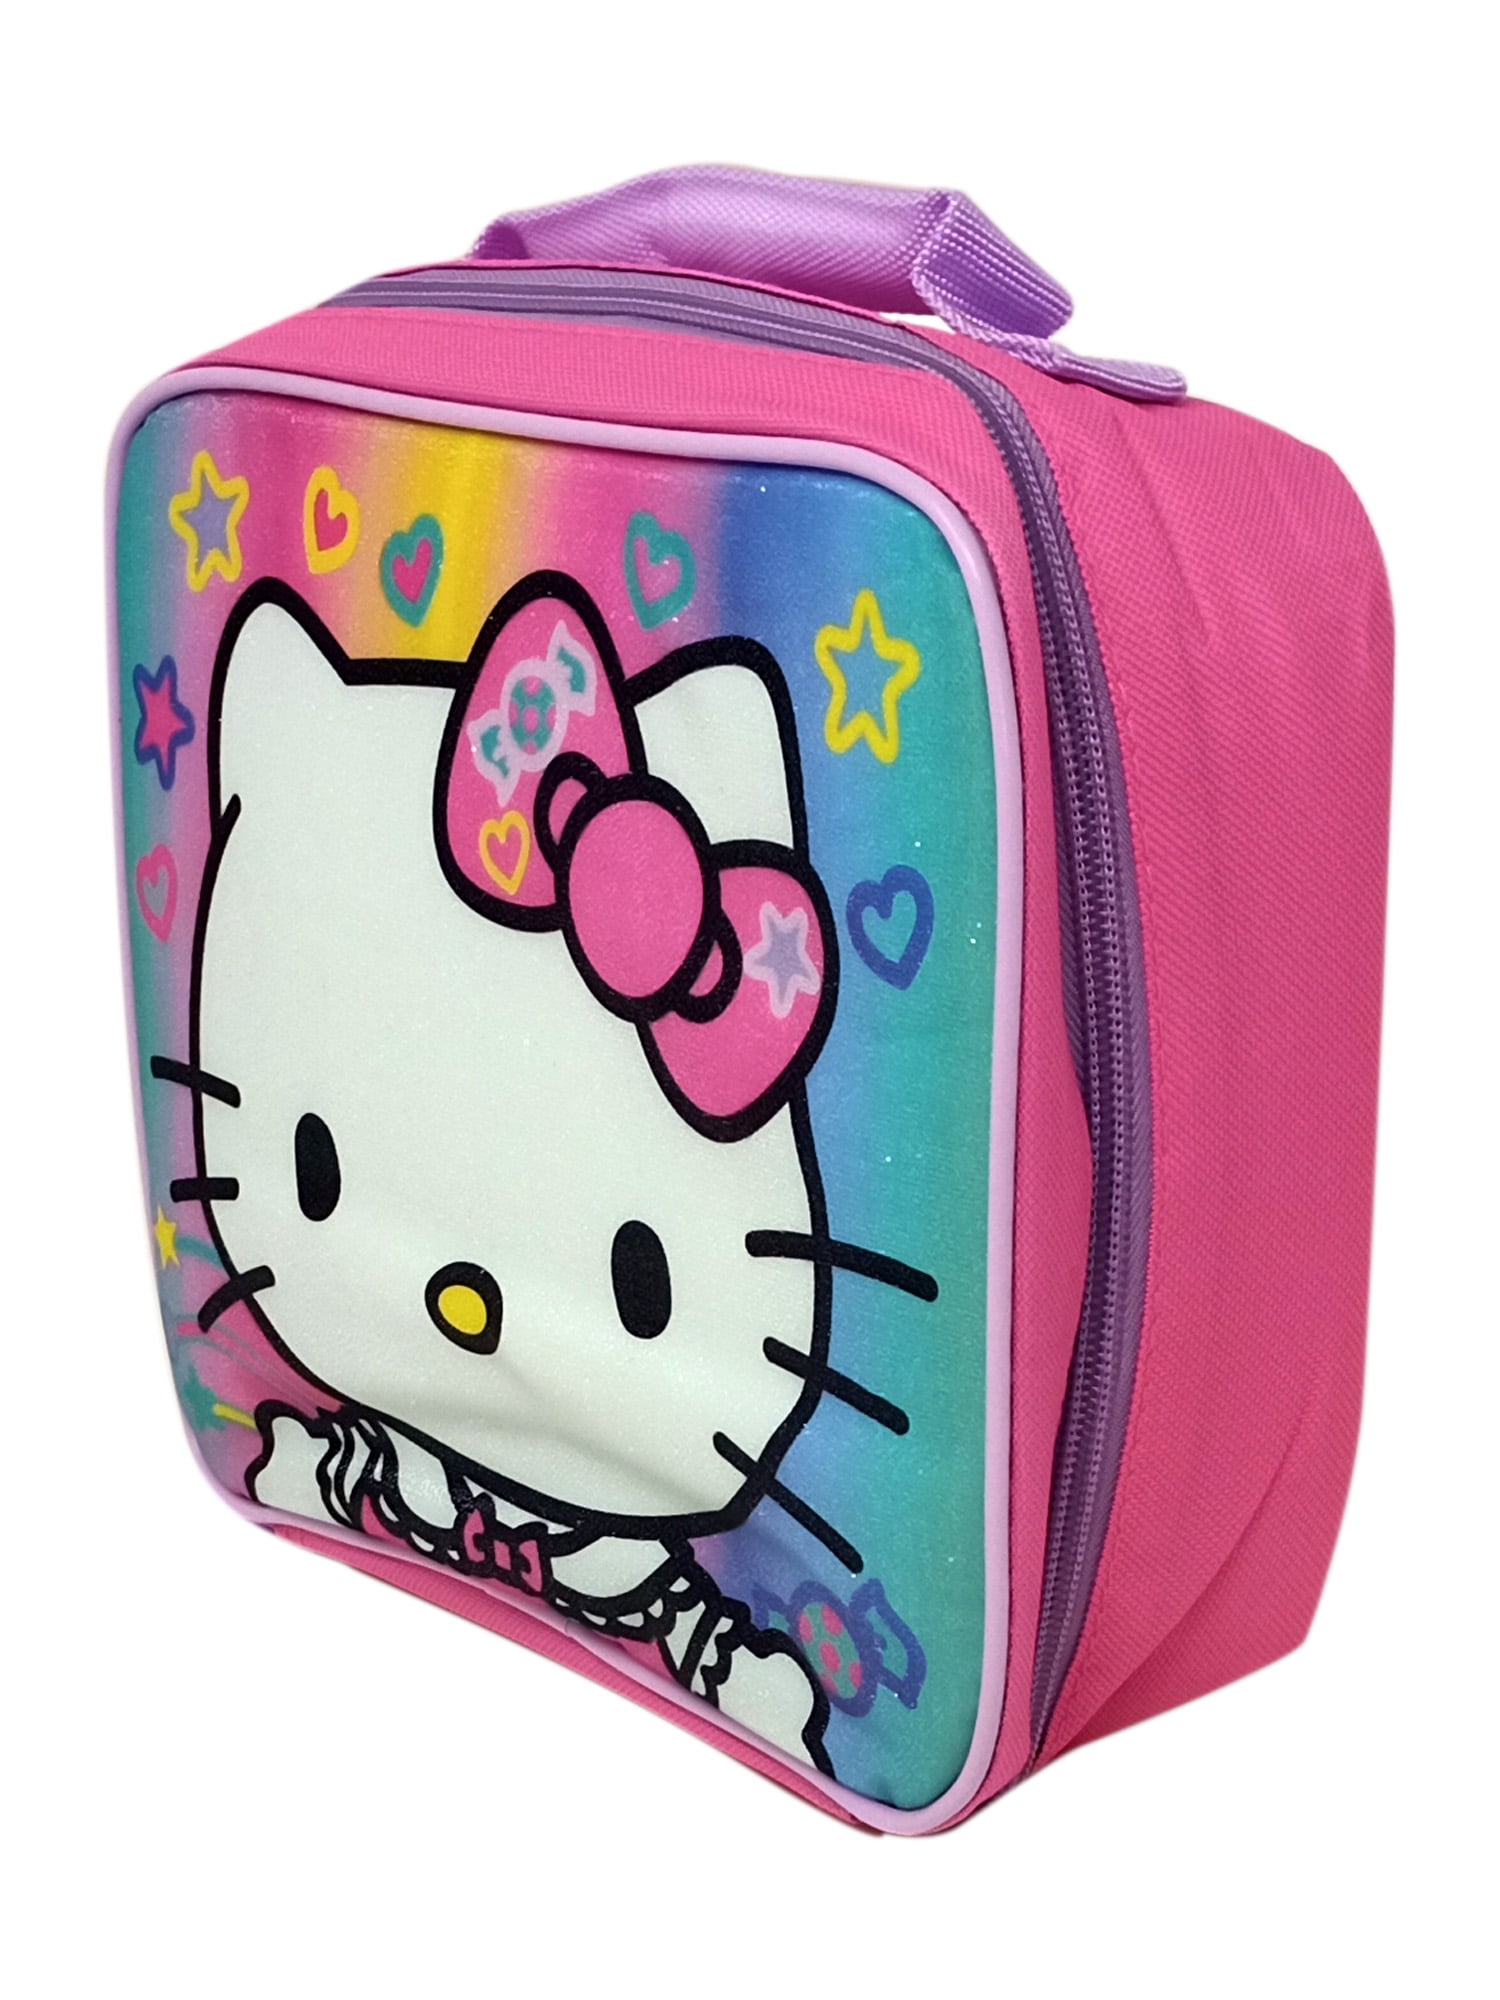 Skater Hello Kitty Insulated Lunch Bag As Shown in Figure One Size